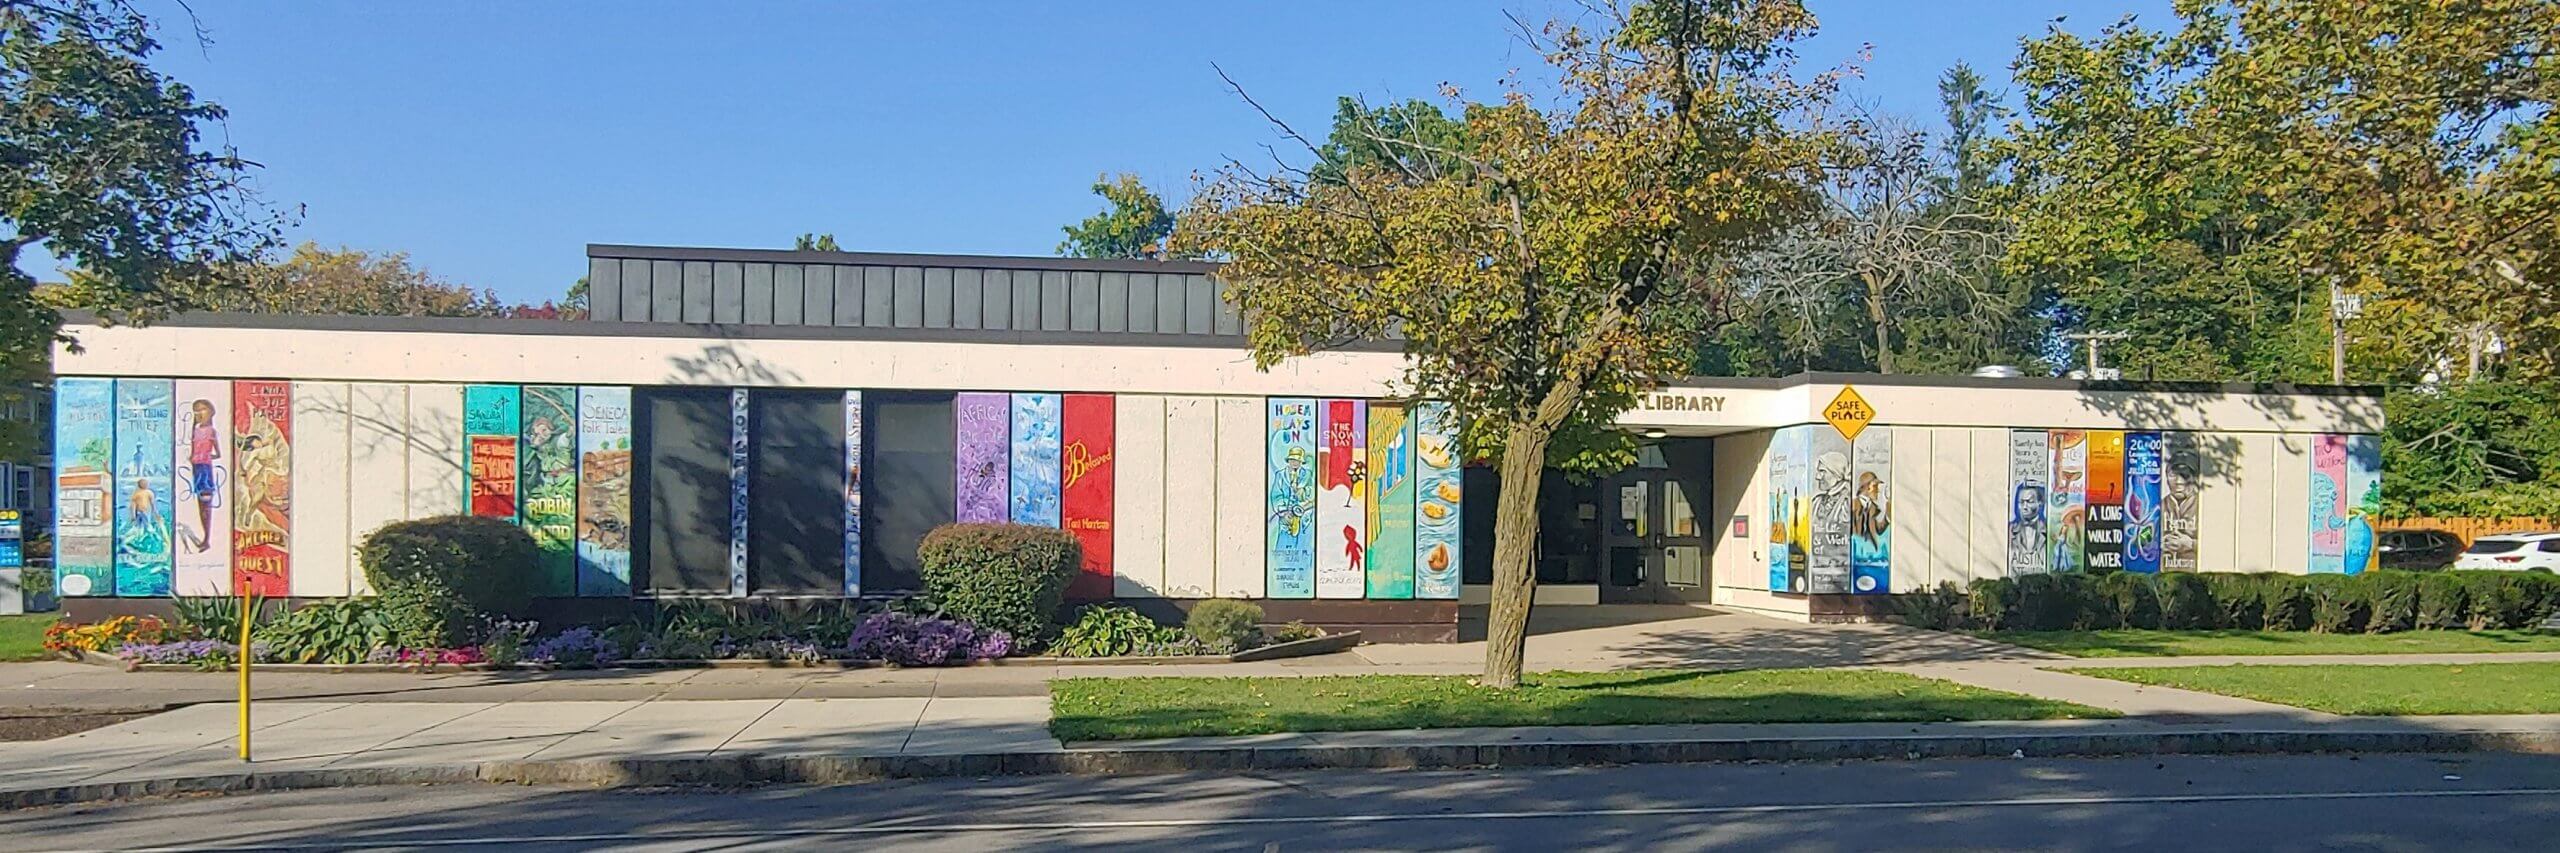 Exterior of Arnett Branch Library. A single story building.